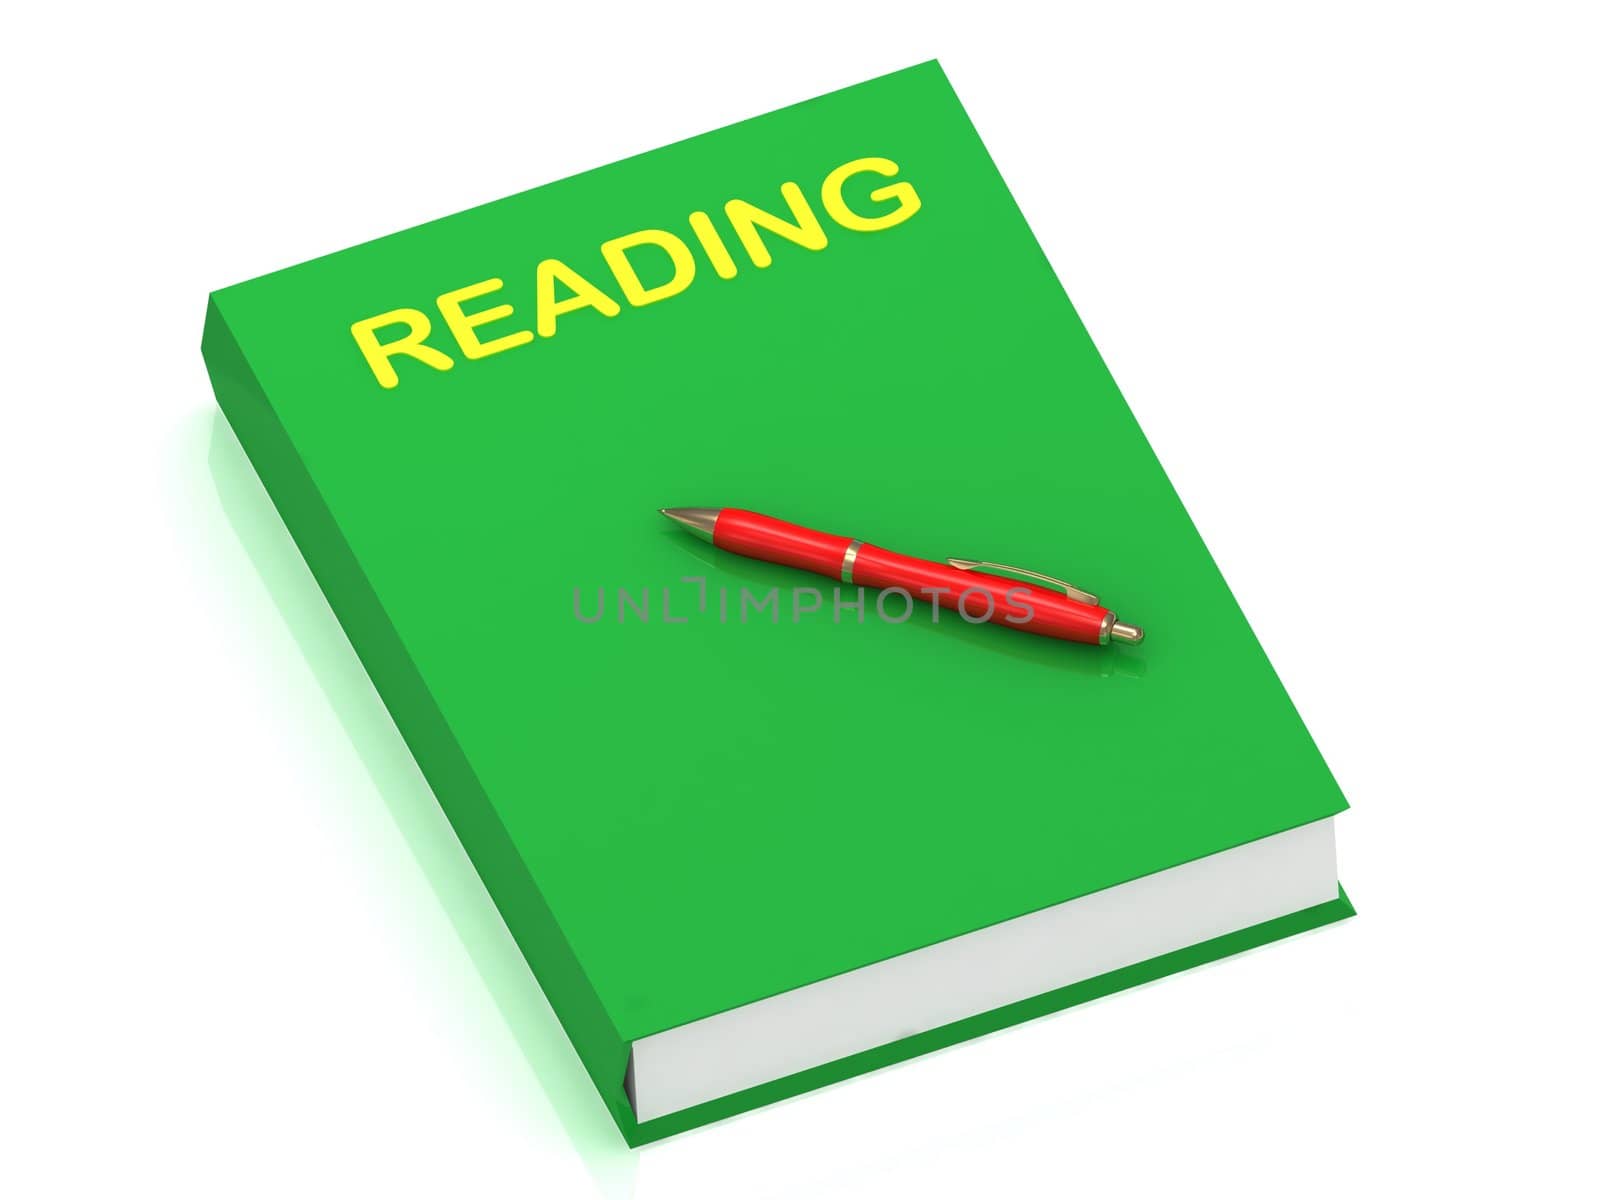 READING name on cover book and red pen on the book. 3D illustration isolated on white background